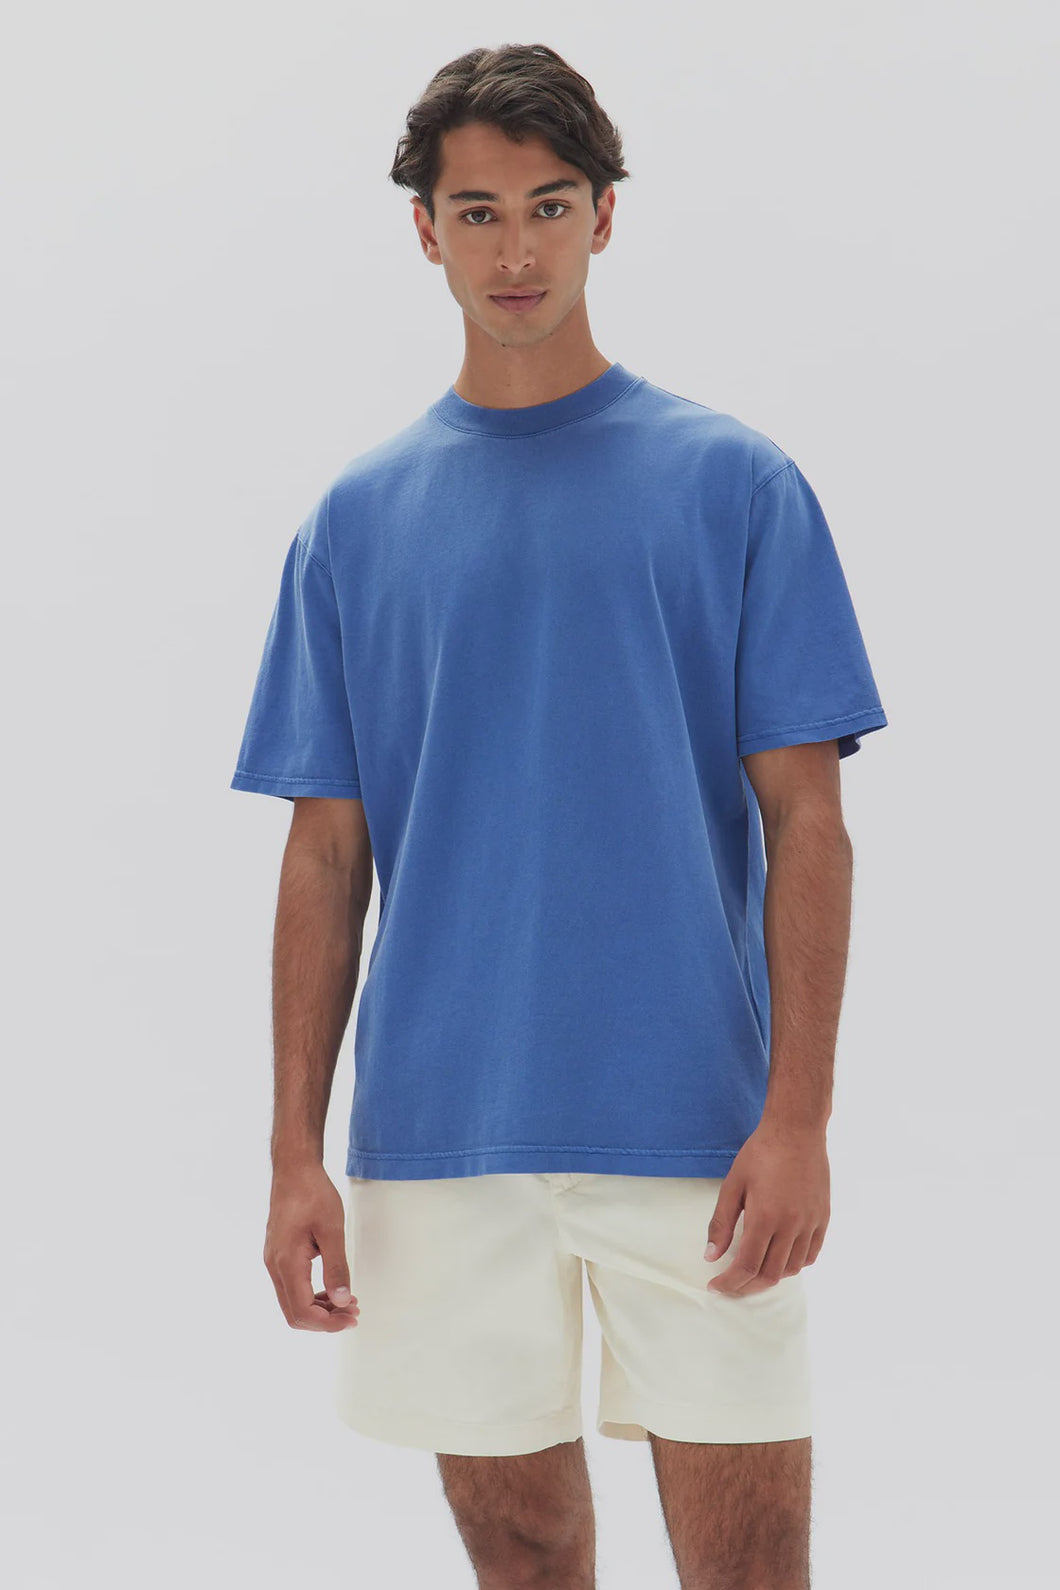 ASSEMBLY LABEL - KNOX ORGANIC OVERSIZED TEE - ROYAL